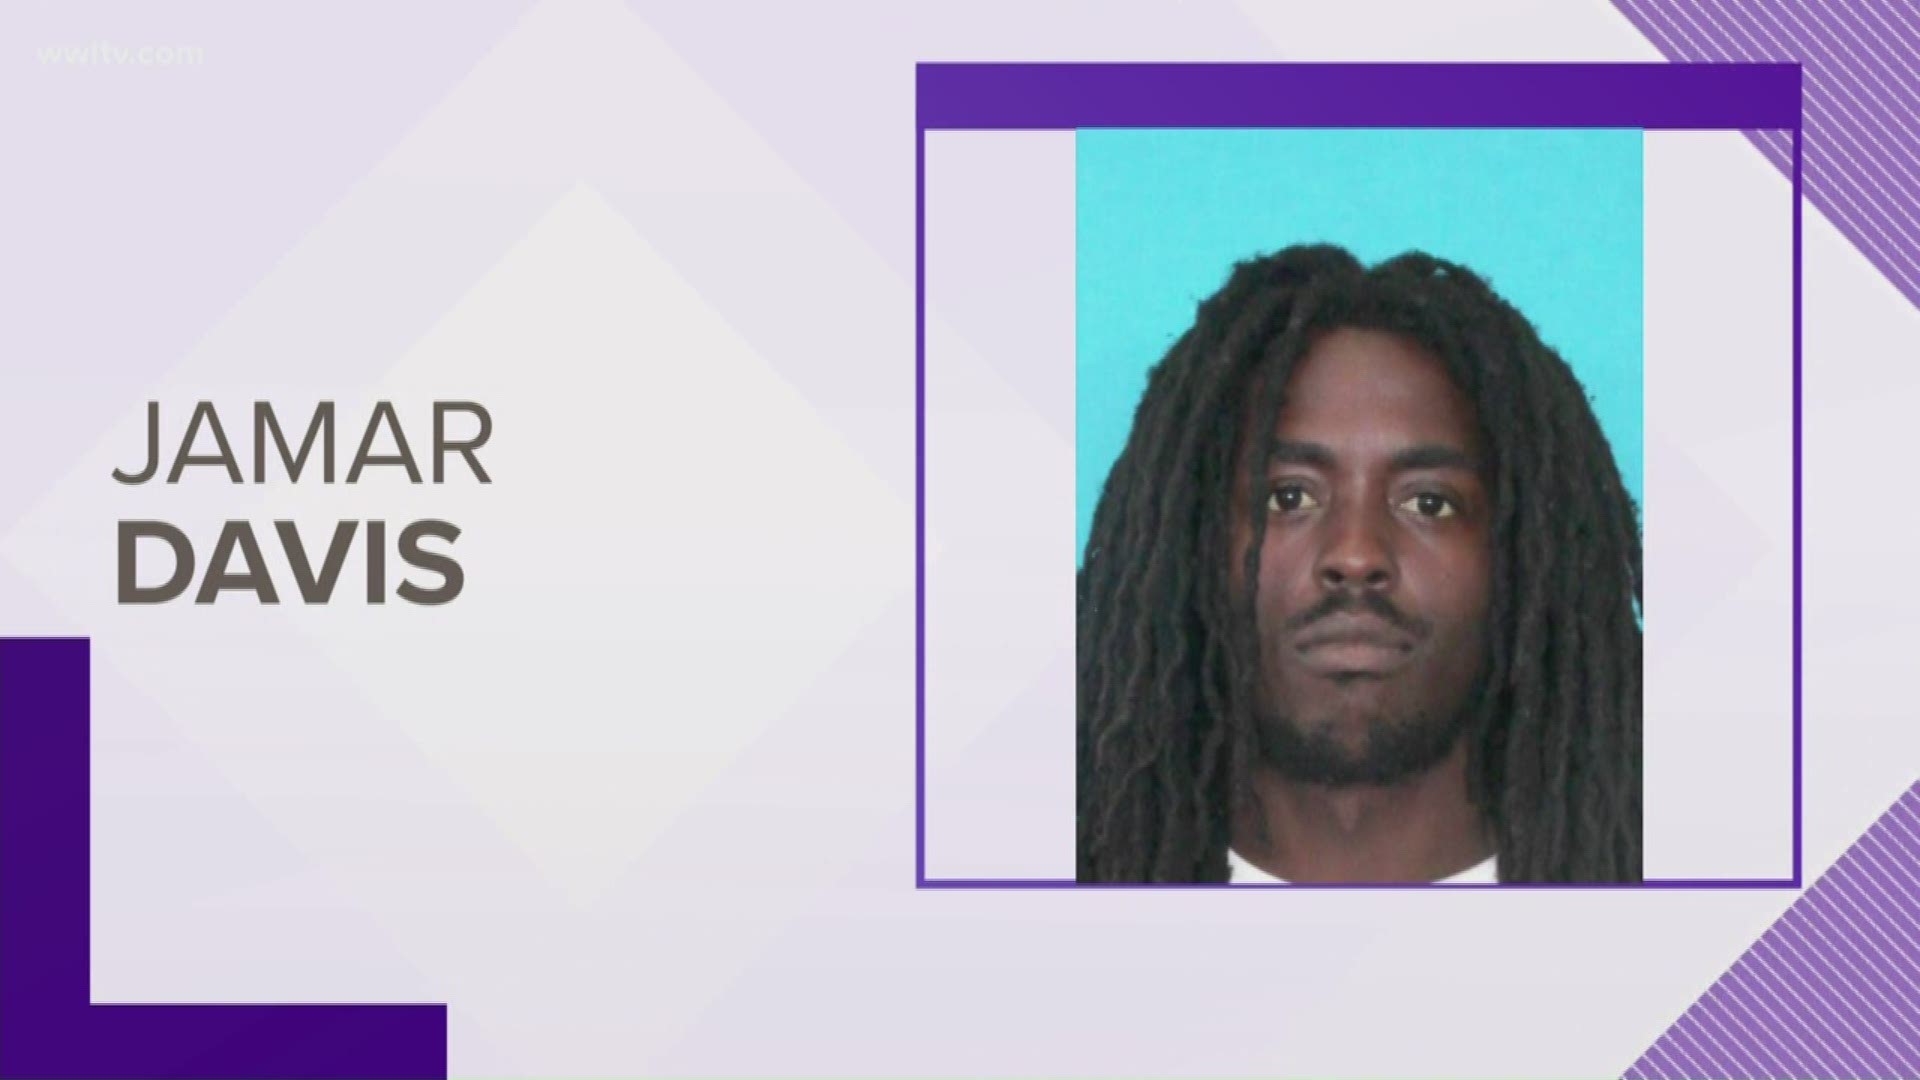 Jamar Davis, 30, faces child desertion charges after his 2-year-old son was found alone in a Walmart parking lot Monday morning in Kenner, police said.